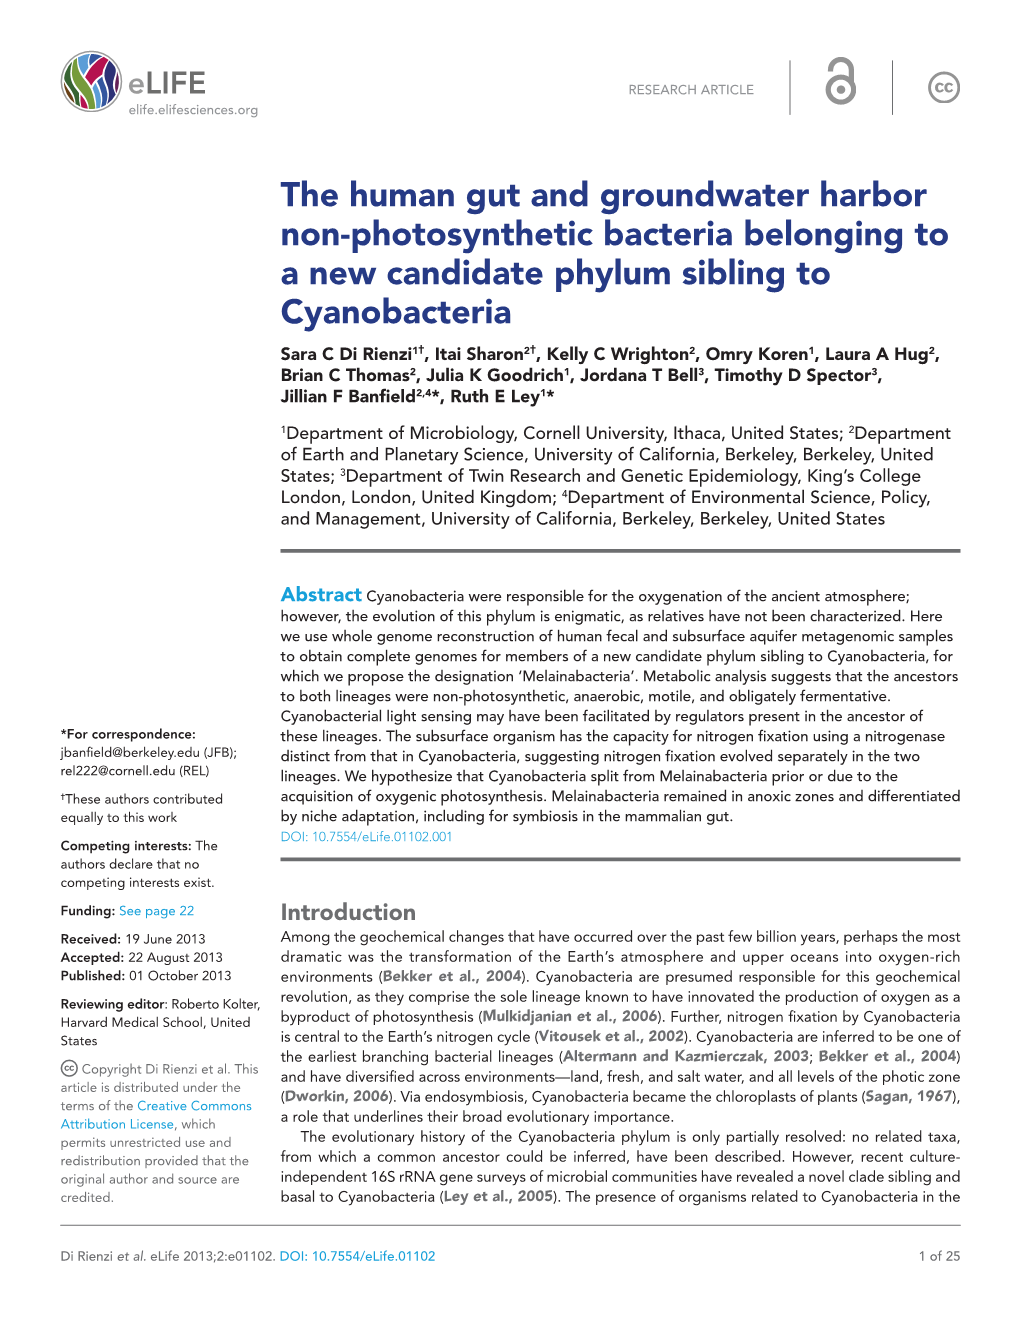 The Human Gut and Groundwater Harbor Non-Photosynthetic Bacteria